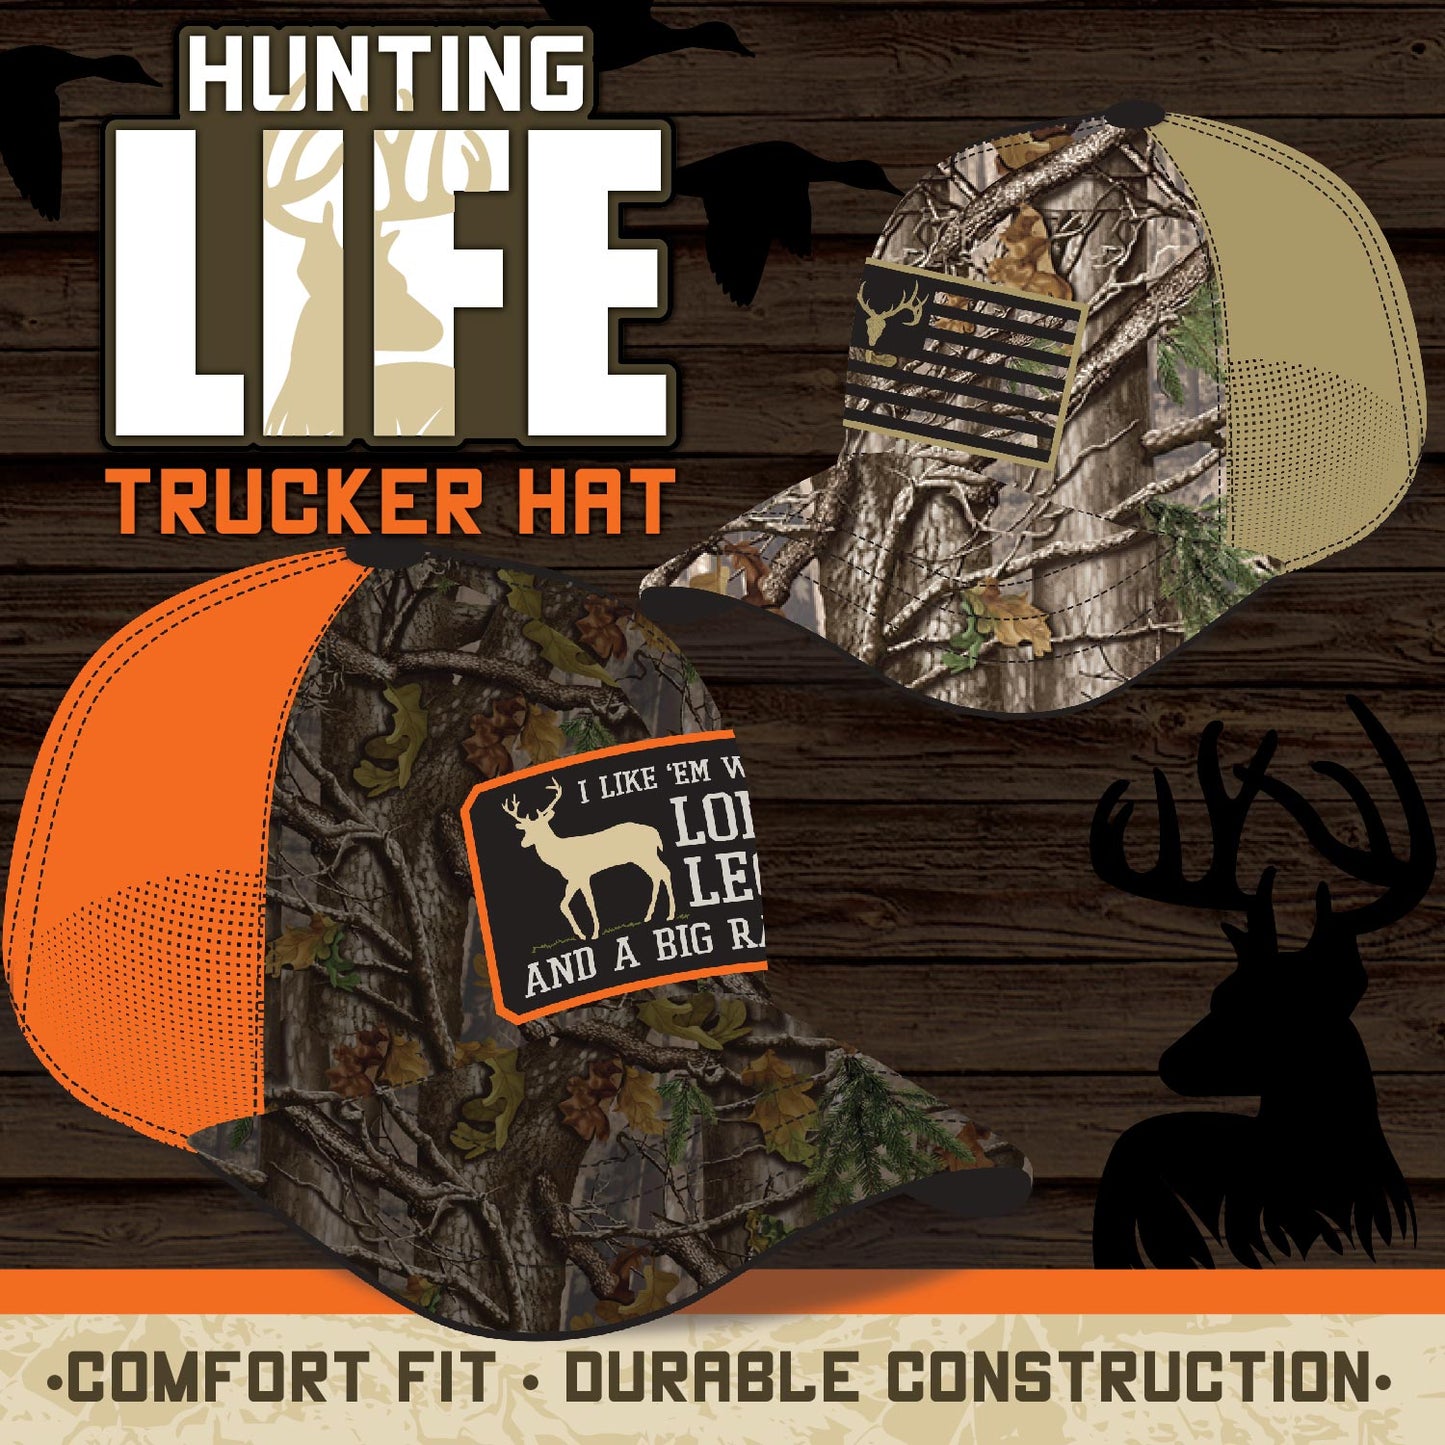 ITEM NUMBER 023756 HUNTING LIFE TRUCKER HATS 6 PIECES PER DISPLAY